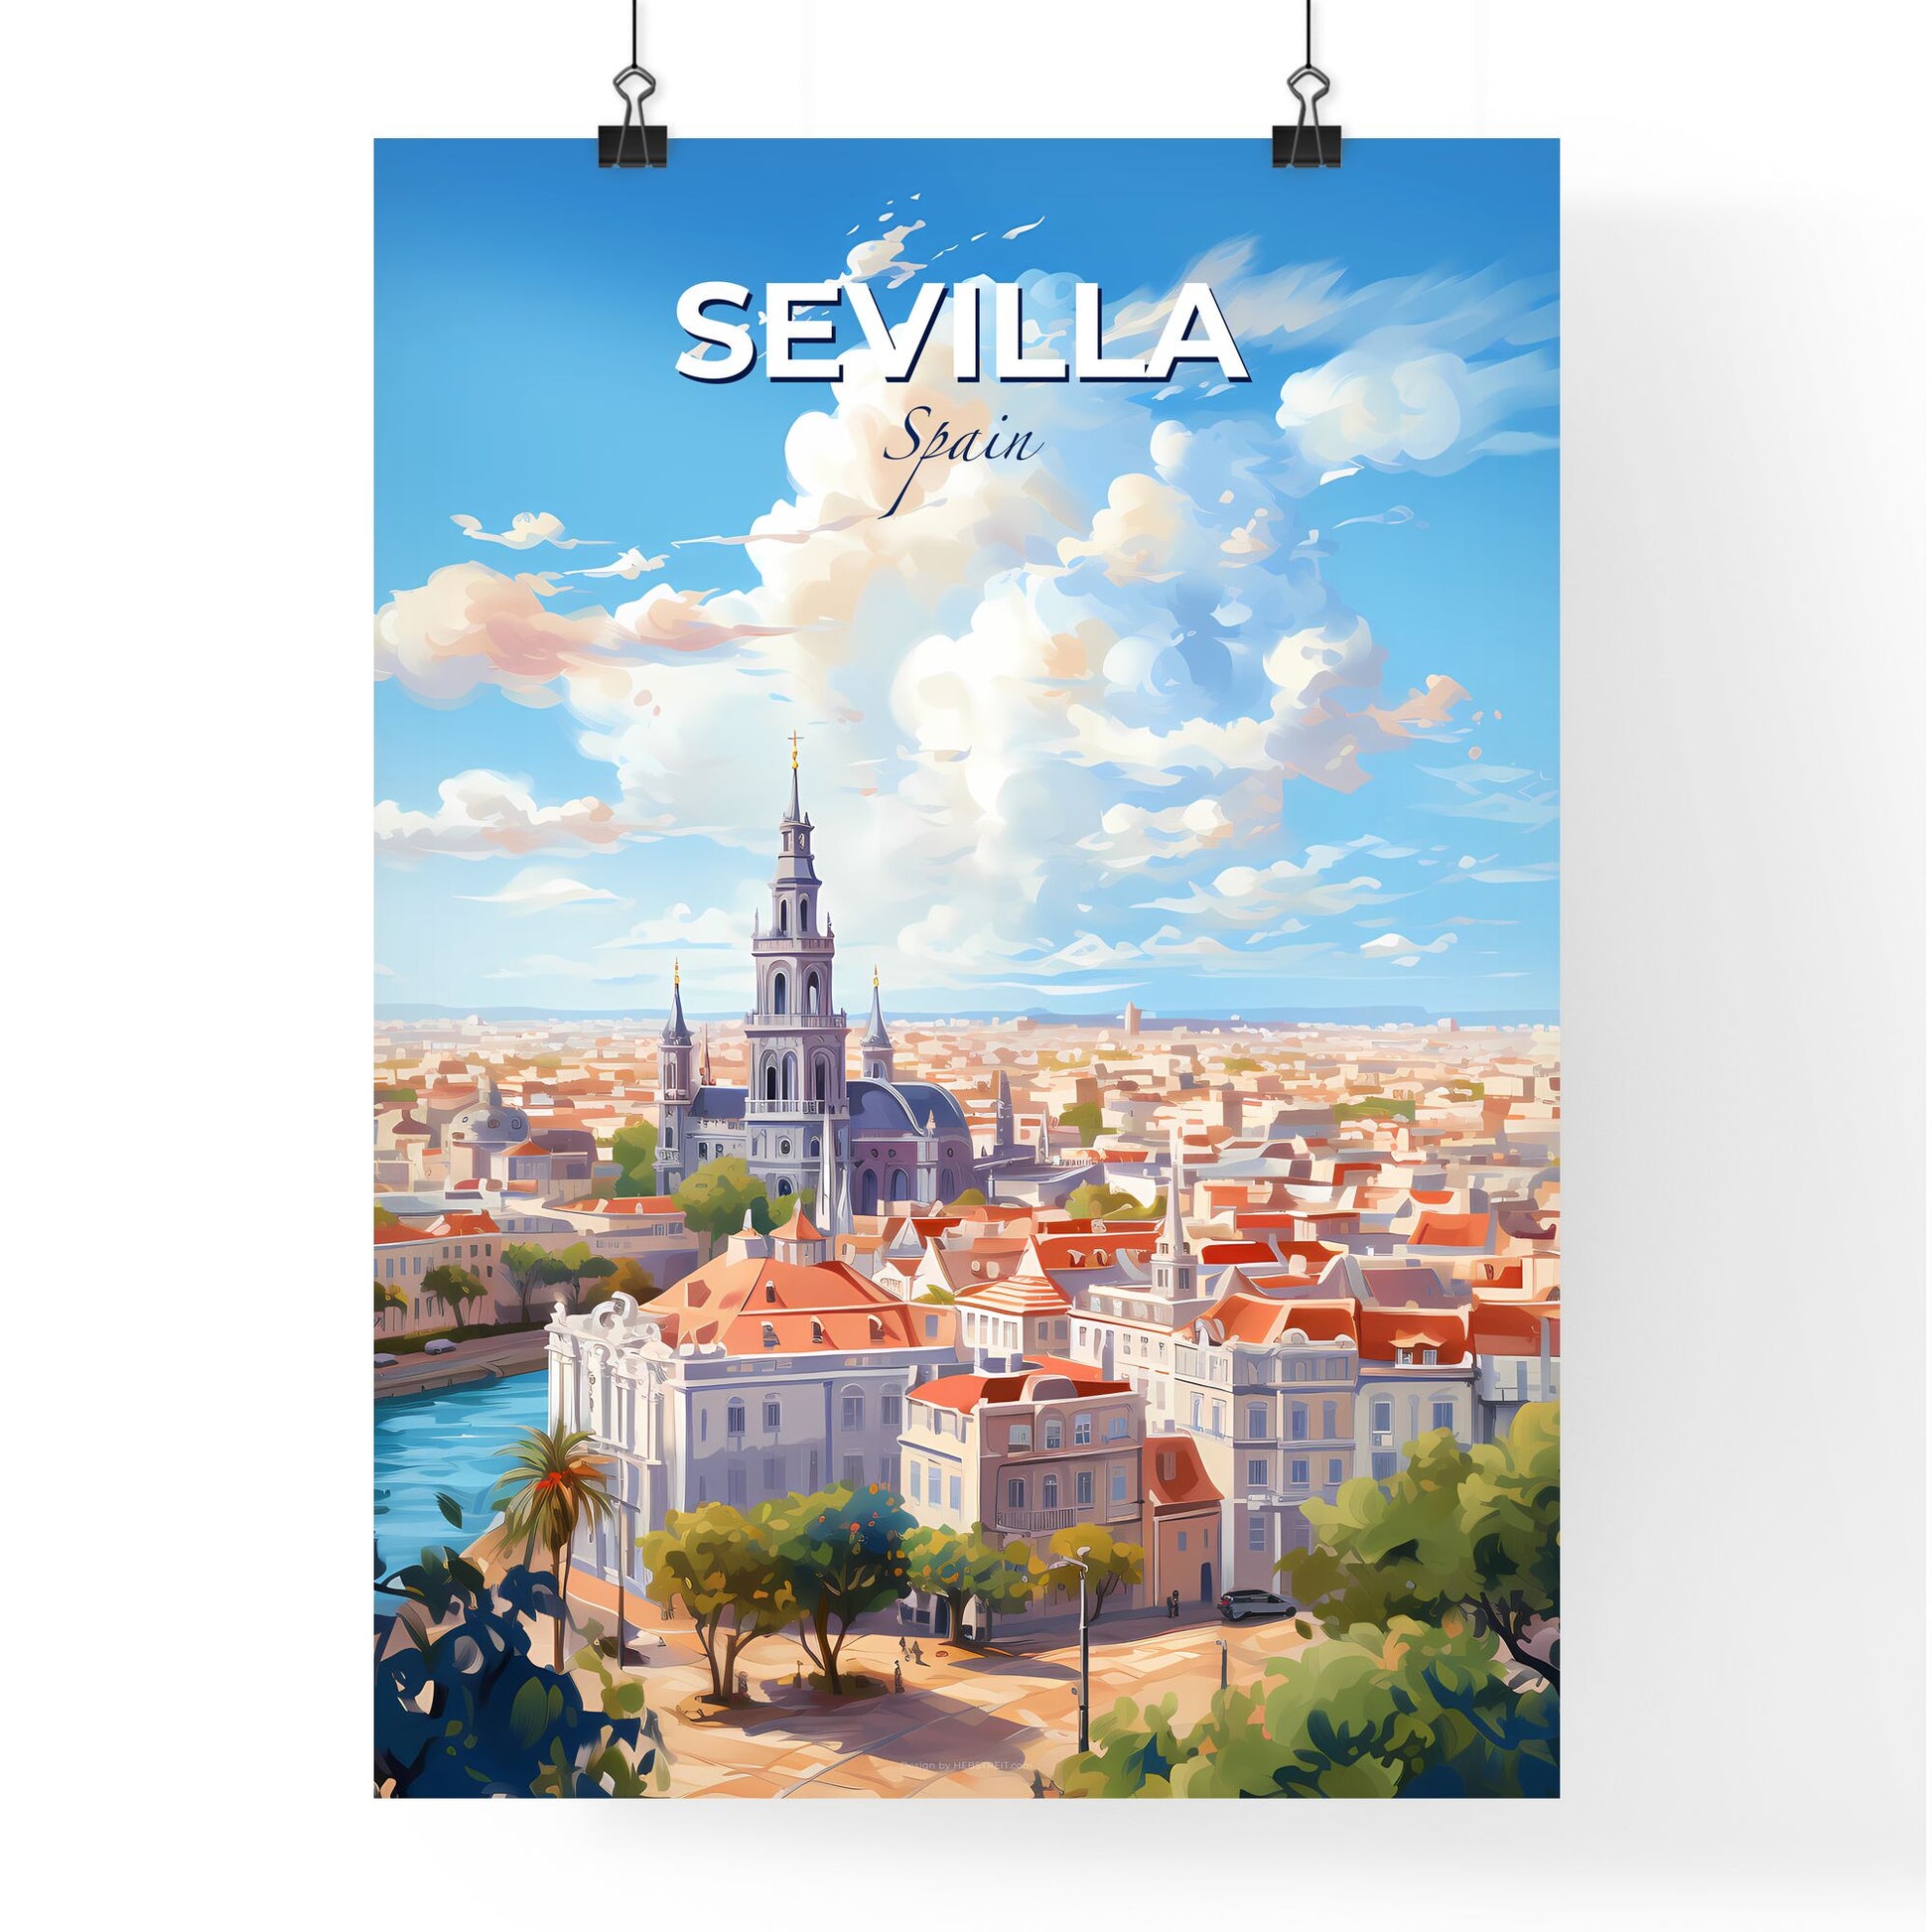 Sevilla Spain Skyline - A City With A River And A Church - Customizable Travel Gift Default Title